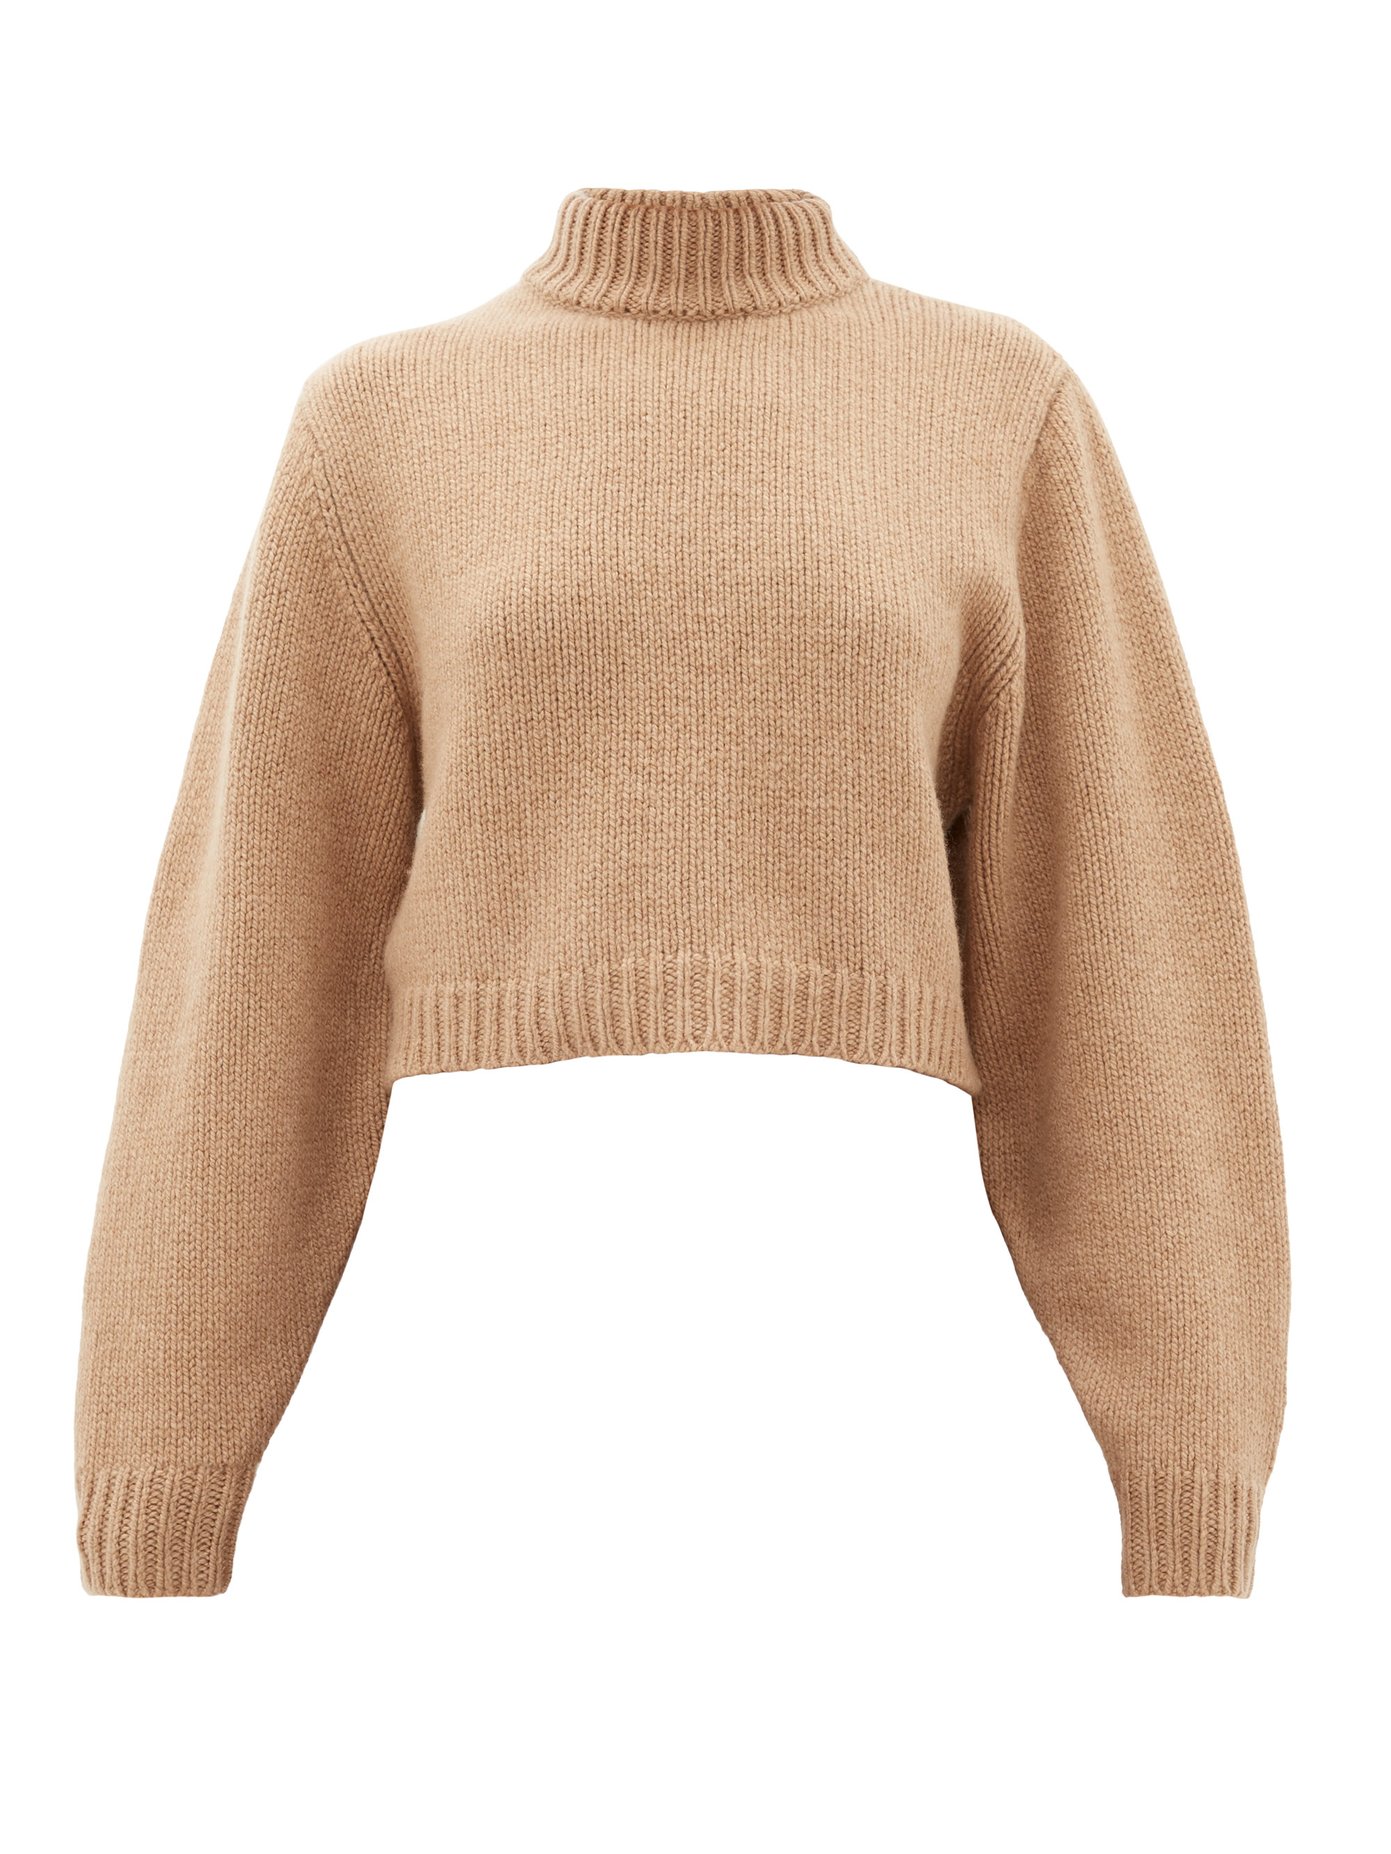 Tabeth cropped cashmere sweater | The 